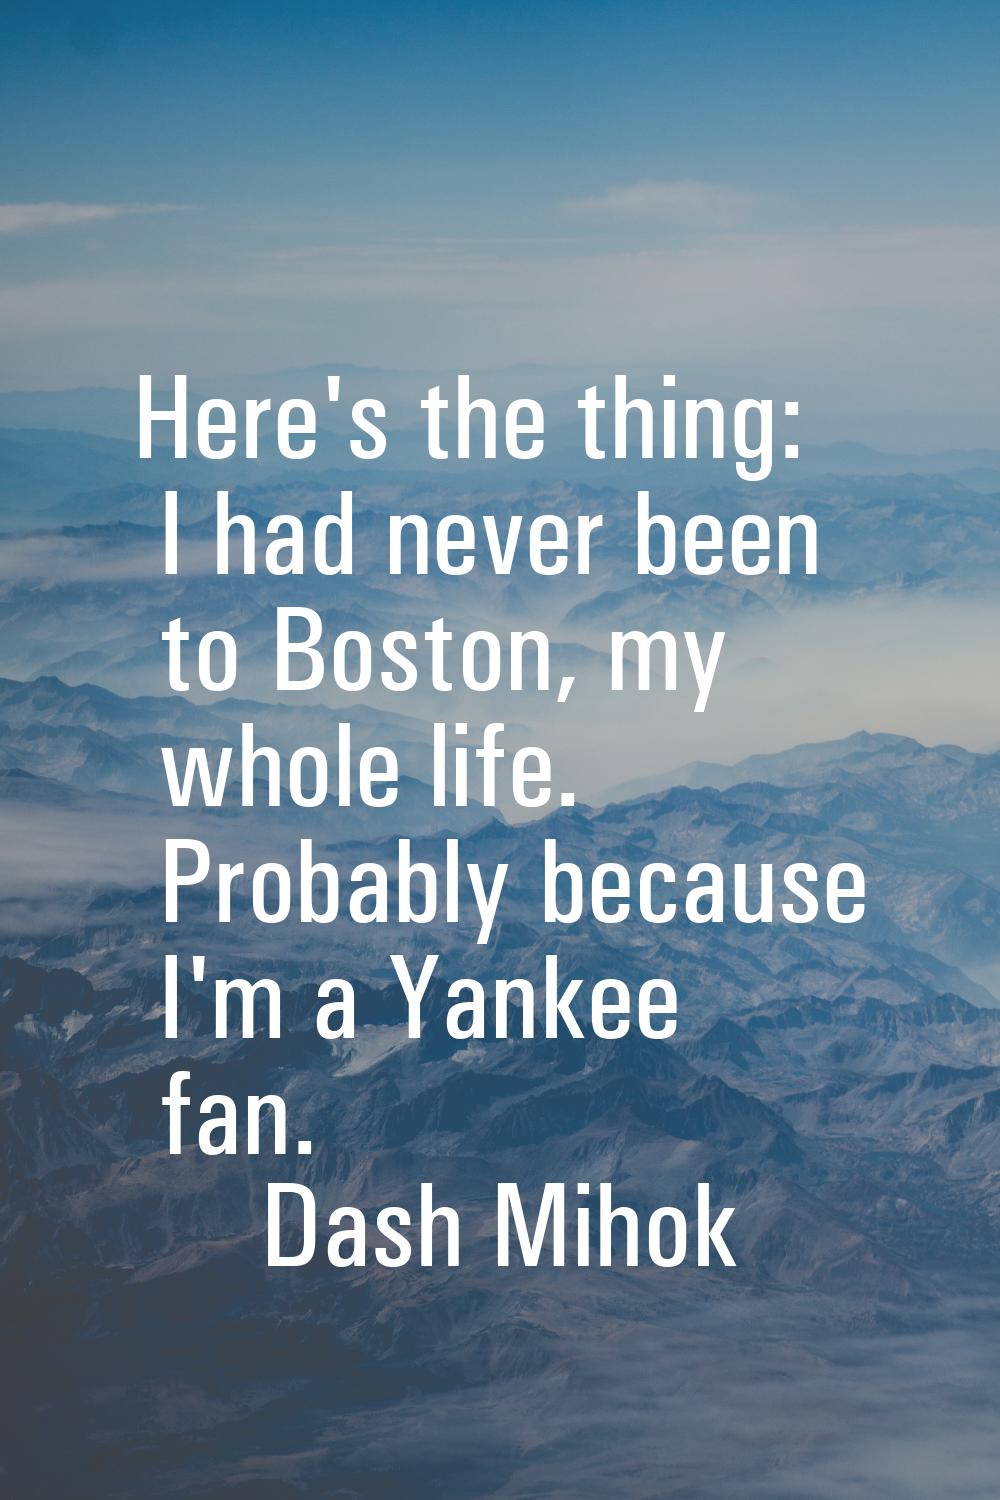 Here's the thing: I had never been to Boston, my whole life. Probably because I'm a Yankee fan.